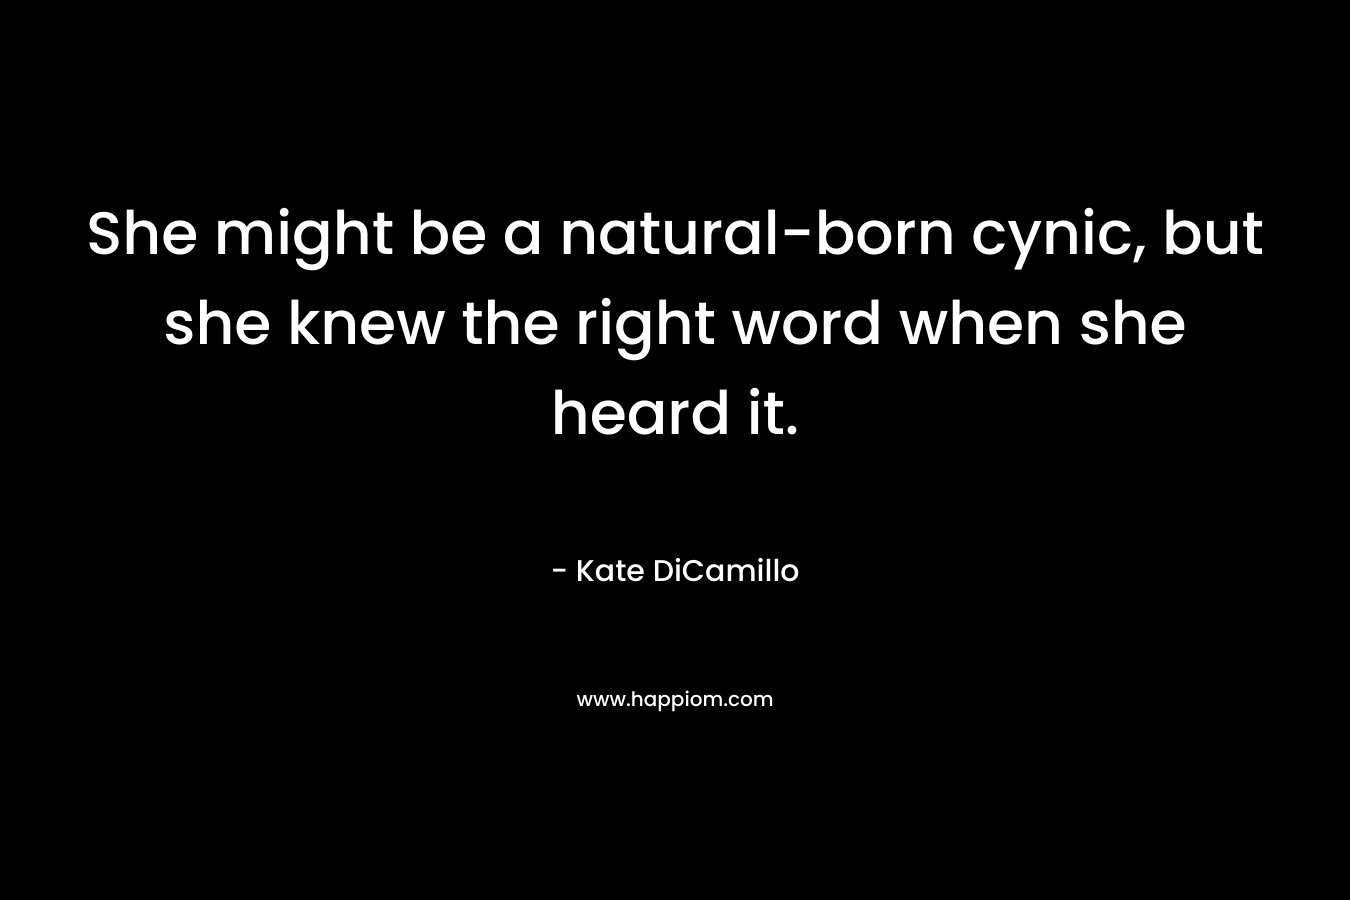 She might be a natural-born cynic, but she knew the right word when she heard it.